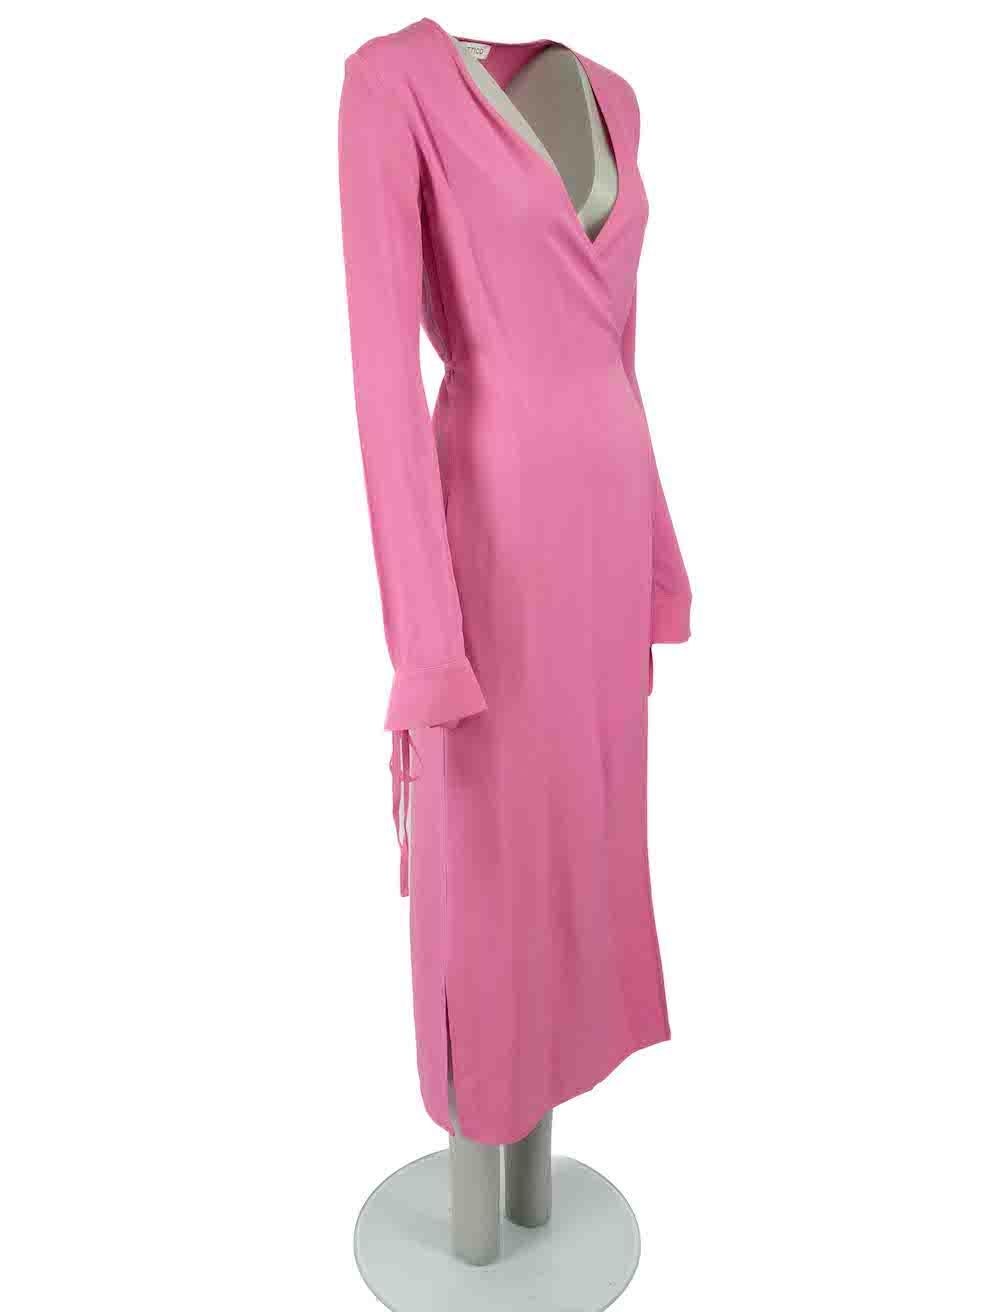 CONDITION is Very good. Minimal wear to dress is evident. Minimal discoloured marks to left bust on this used Attico designer resale item.
 
 Details
 Pink
 Synthetic
 Wrap dress
 Long sleeves
 Midi
 V-neck
 2x Side pockets
 
 Made in Italy

